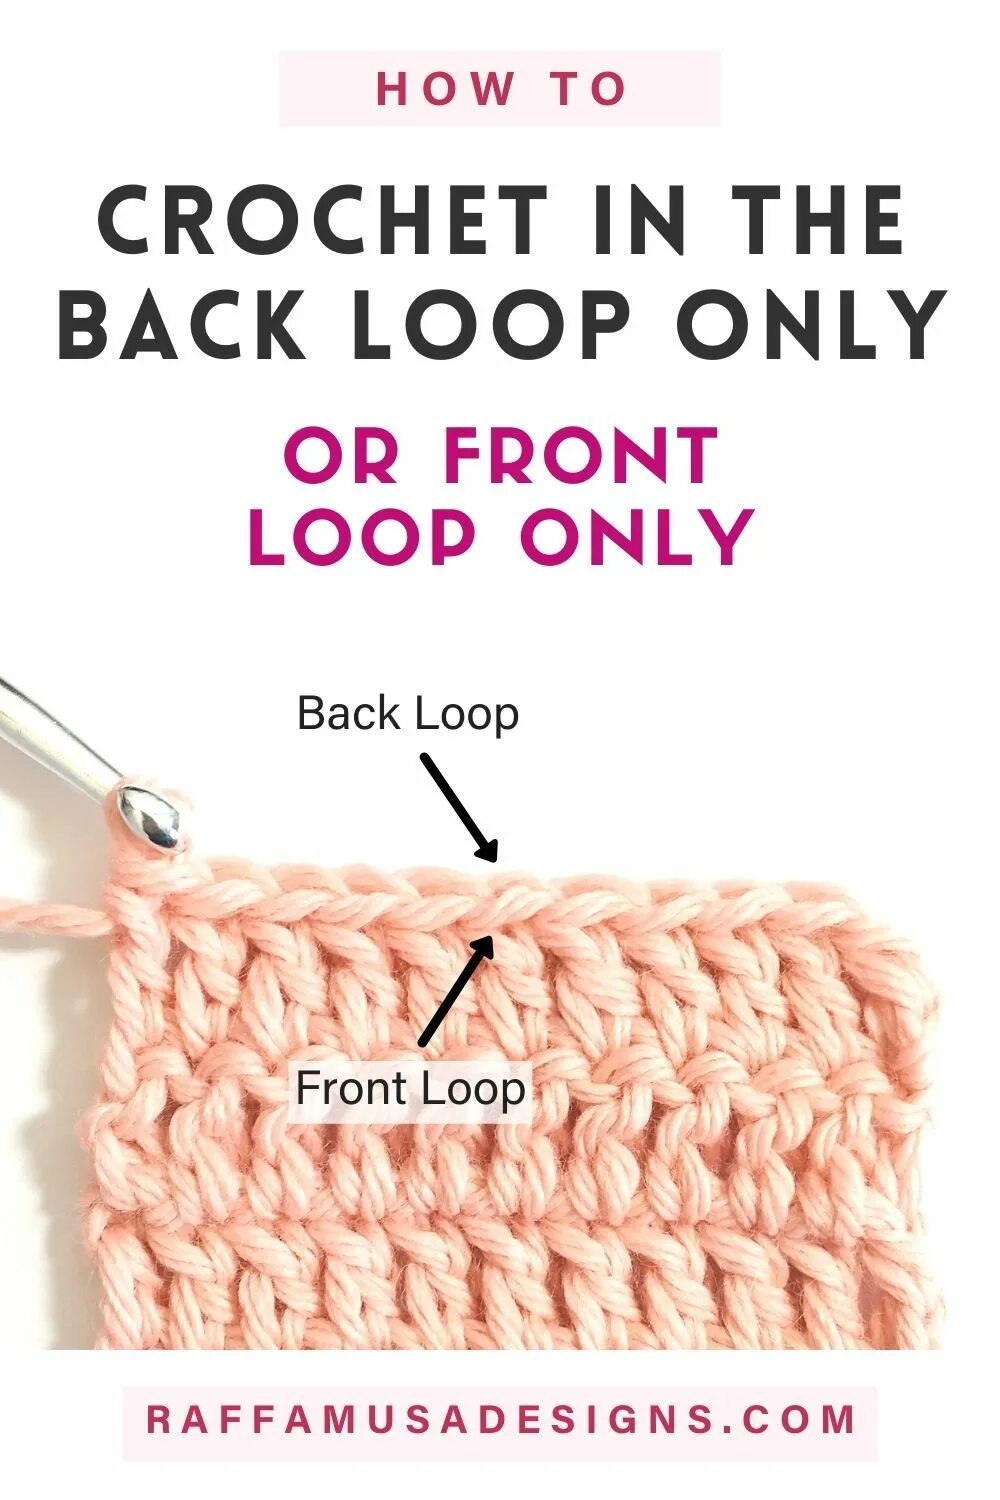 Back loop only. Work in back loops only. Only loops